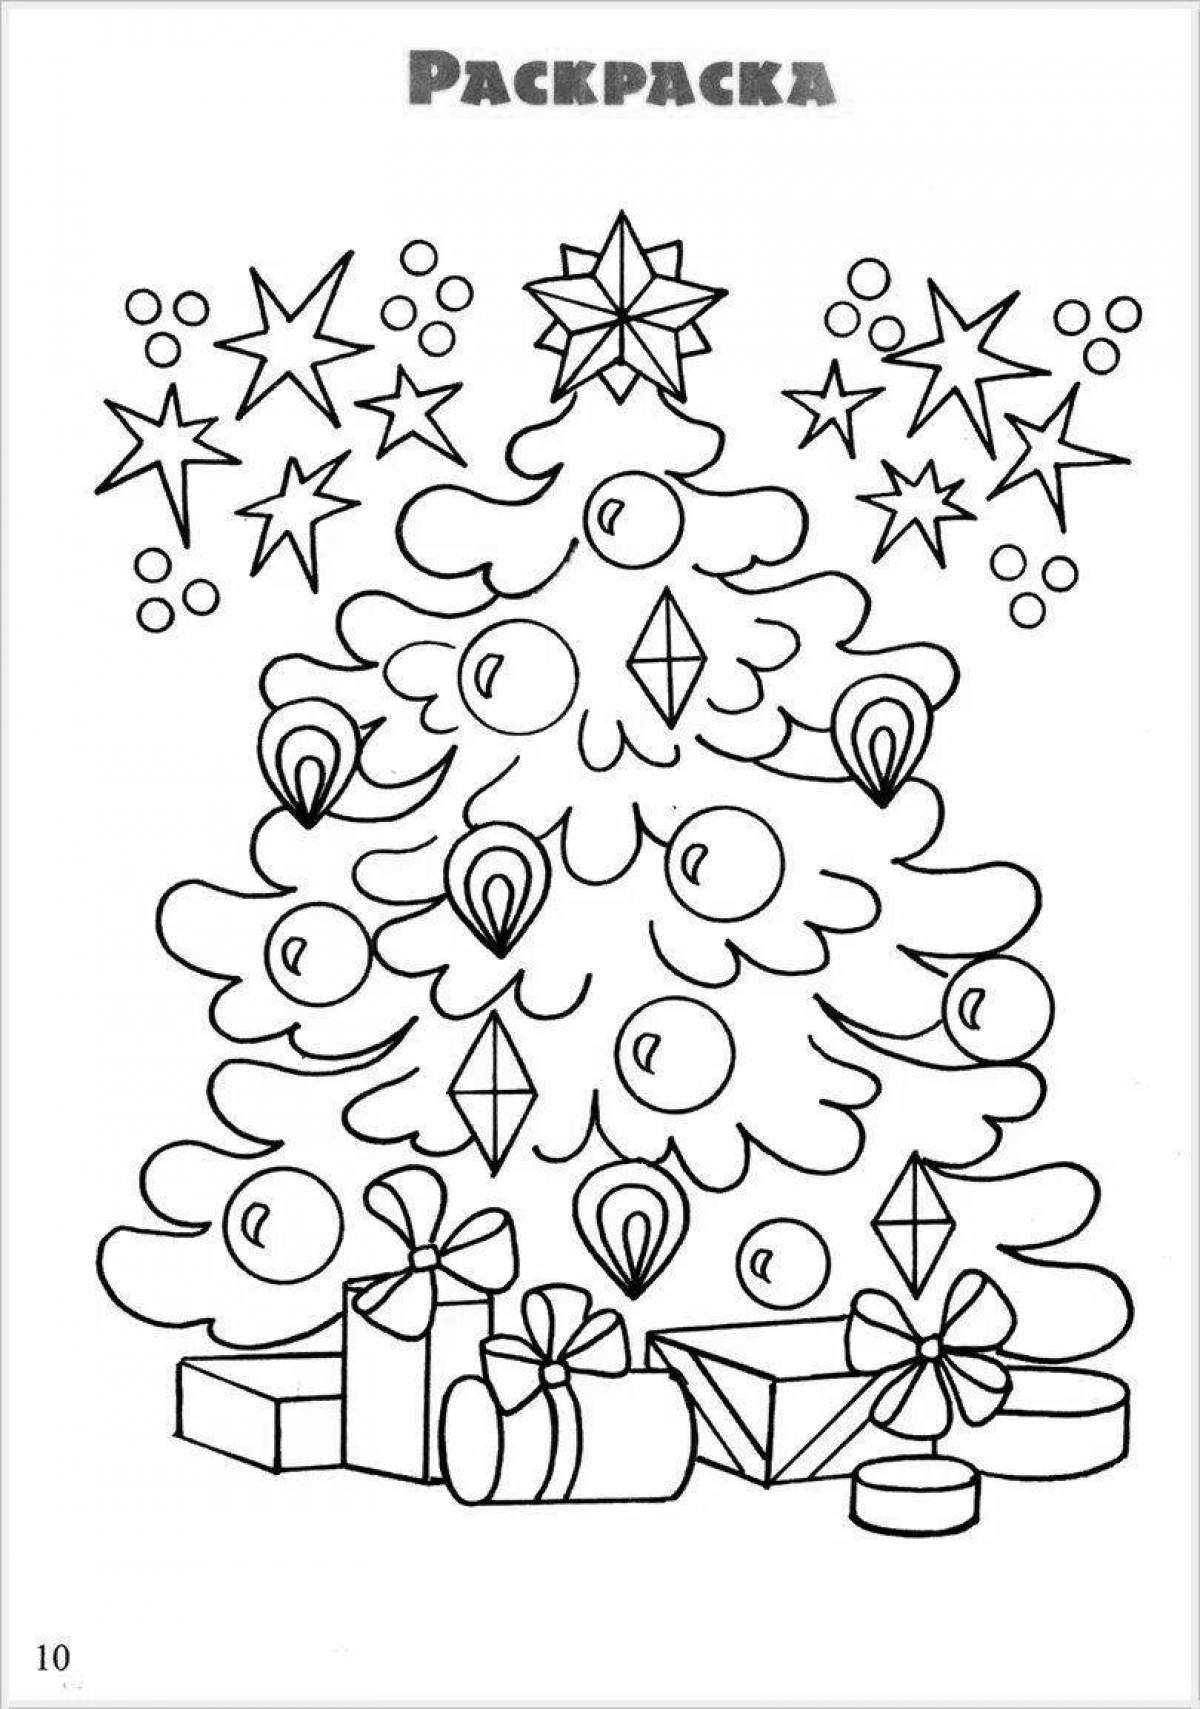 Exquisite Christmas tree coloring book for 6-7 year olds